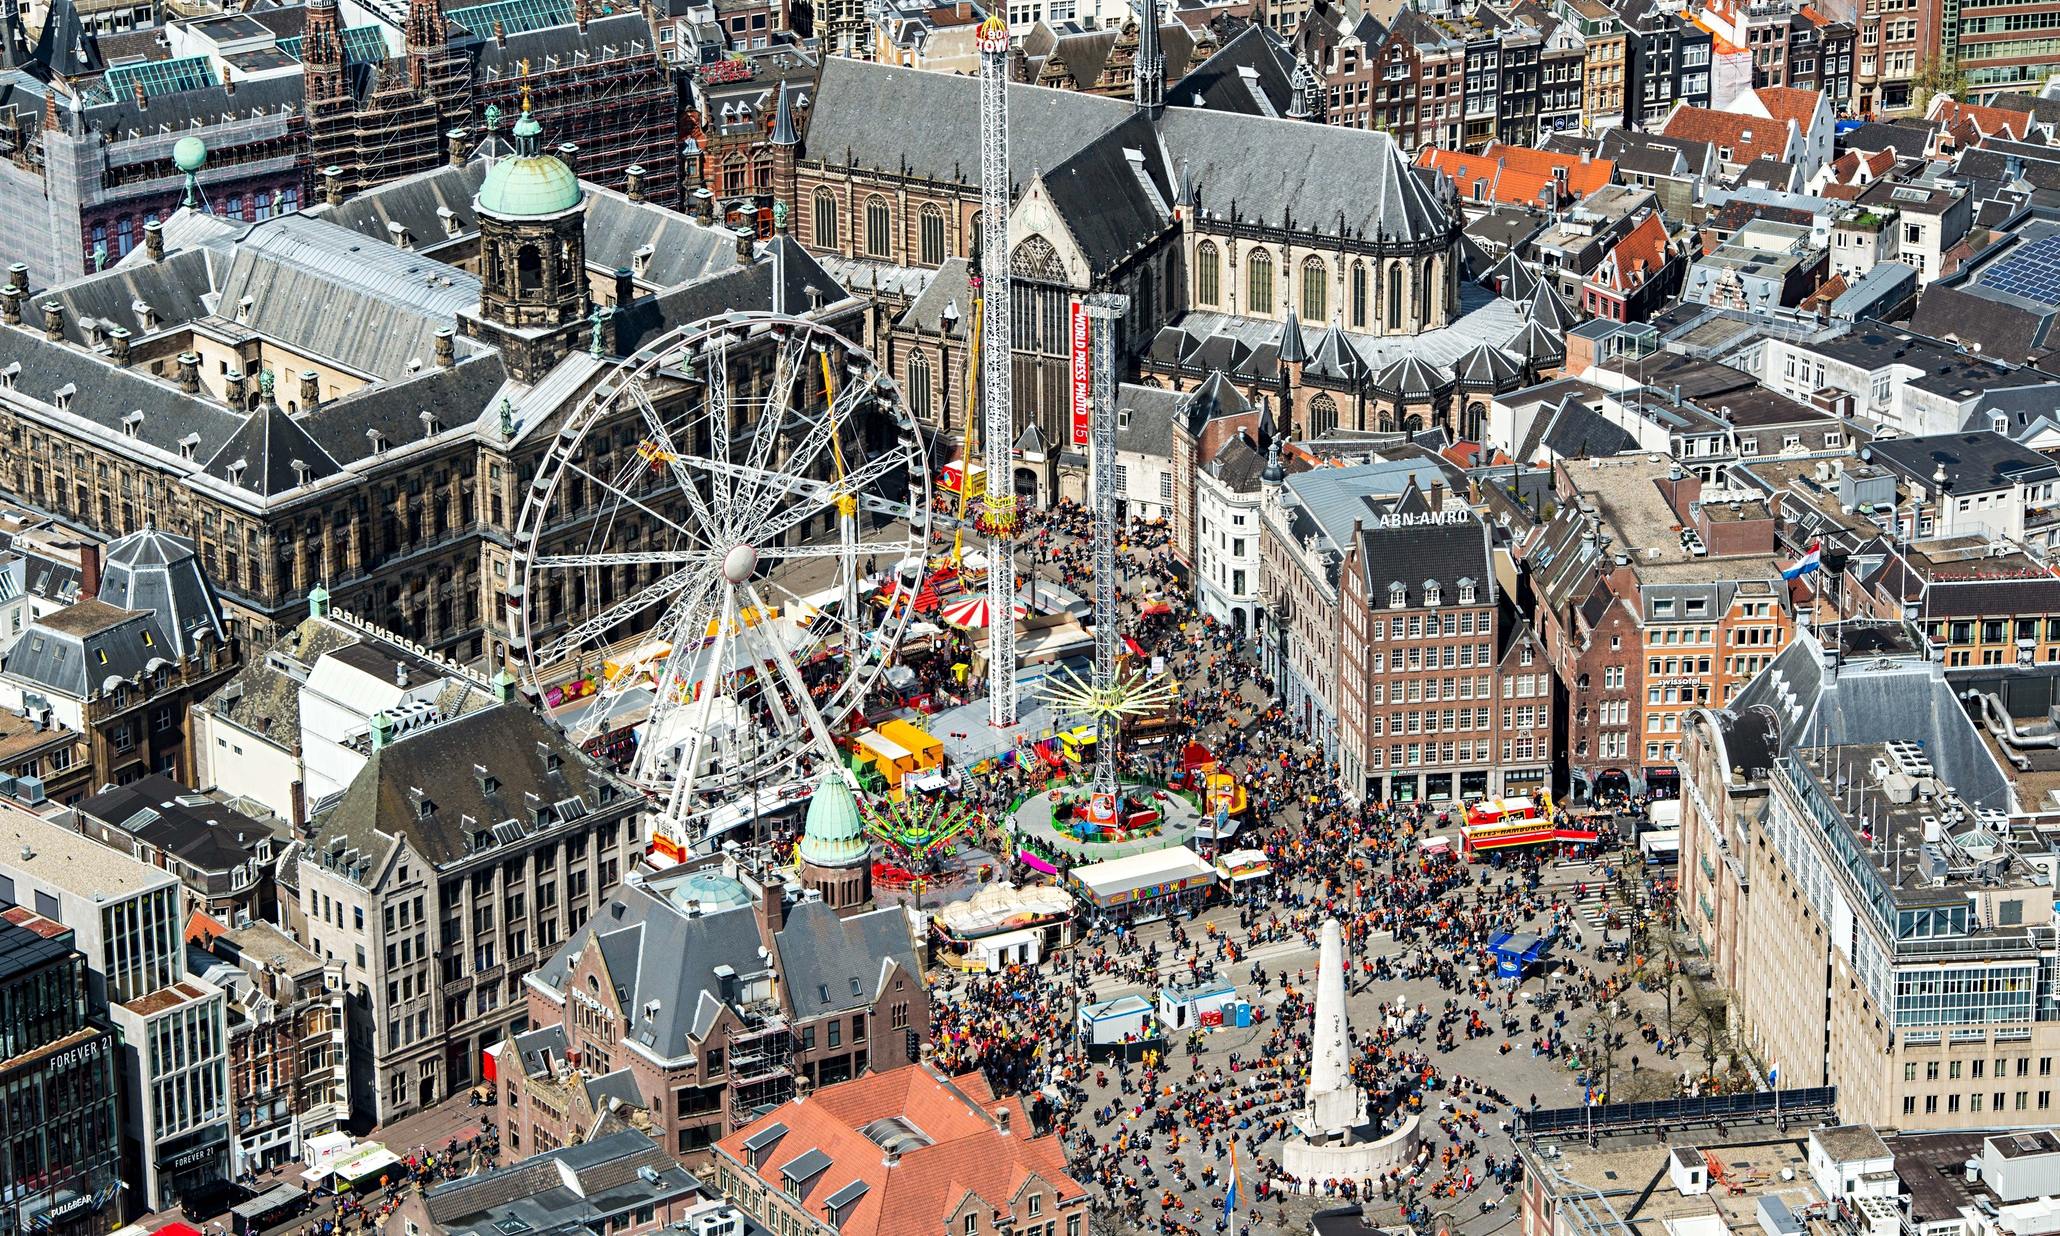 Forget Sex Tours Stag Parties And Drug Cafes … Amsterdam Lures Uk Art